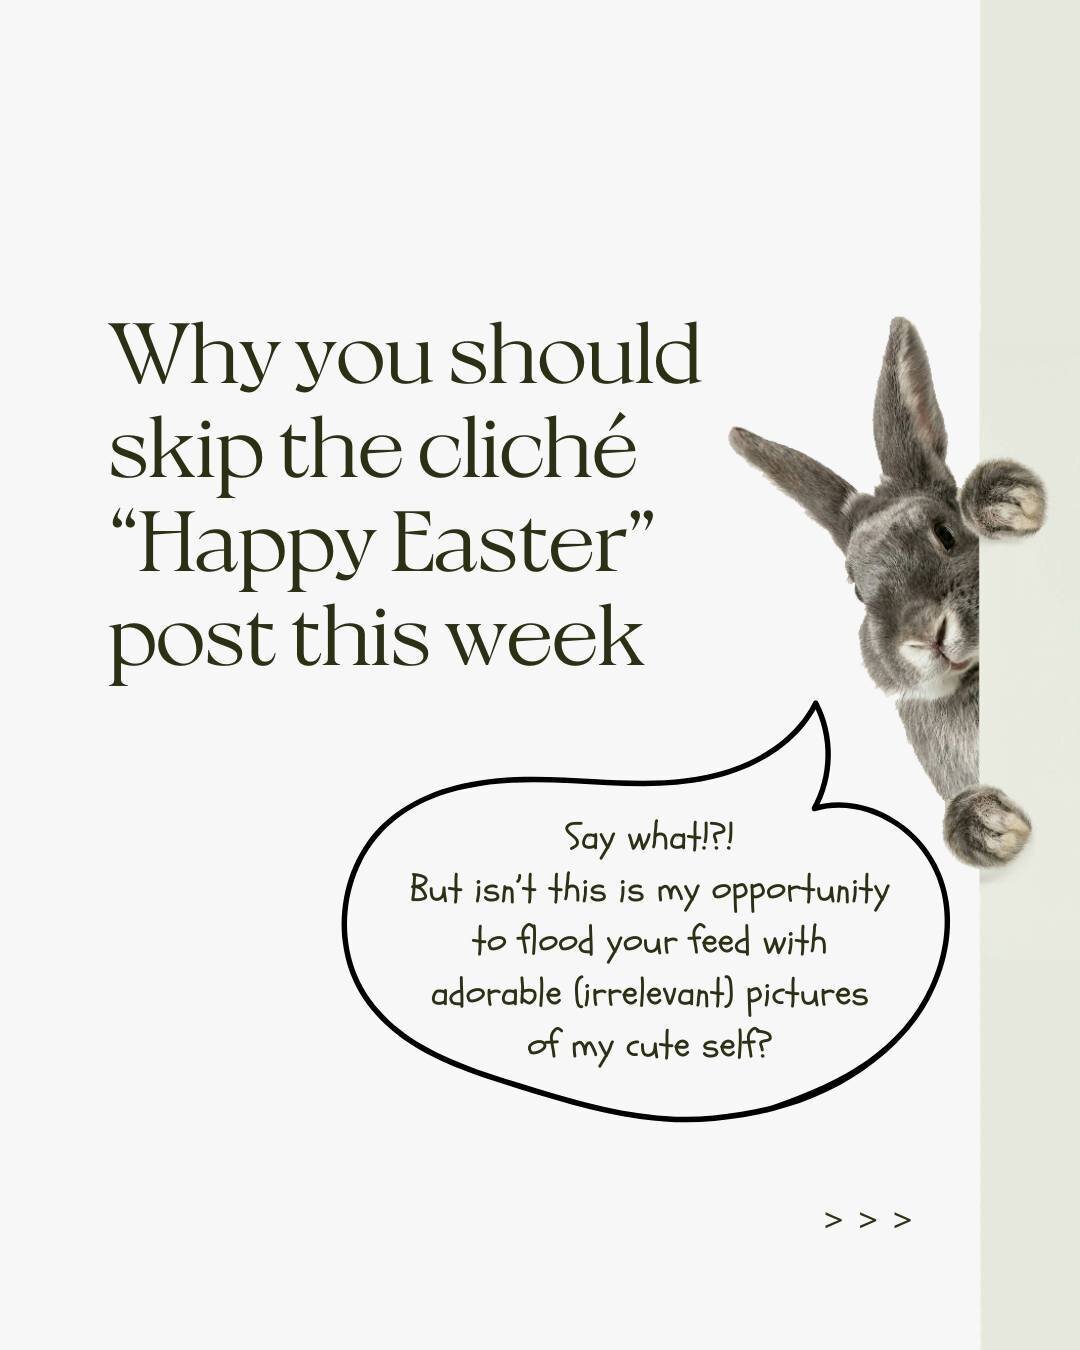 No one loves a cute bunny more than me and I'm guilty as charged 🙋 for posting a bunny or two over past Easter weekends&mdash;for myself and for my clients. But hey, that's all part of learning, especially as the digital marketing landscape evolves!